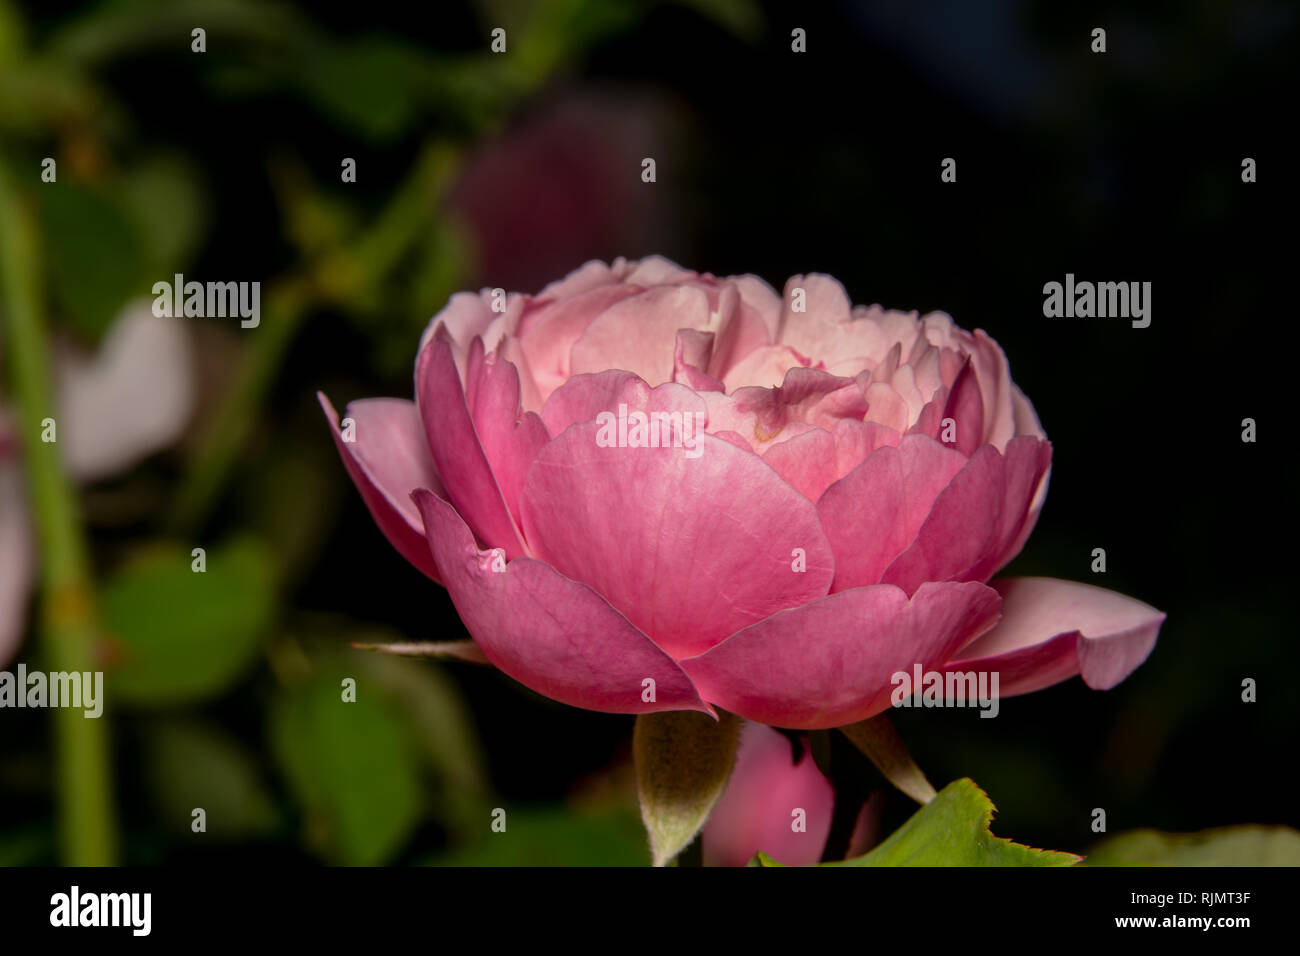 Pink rose fully blossomed with numerous numbers of petals. Thick and beautiful pink rose with beautiful petals with dark background to make it pop Stock Photo